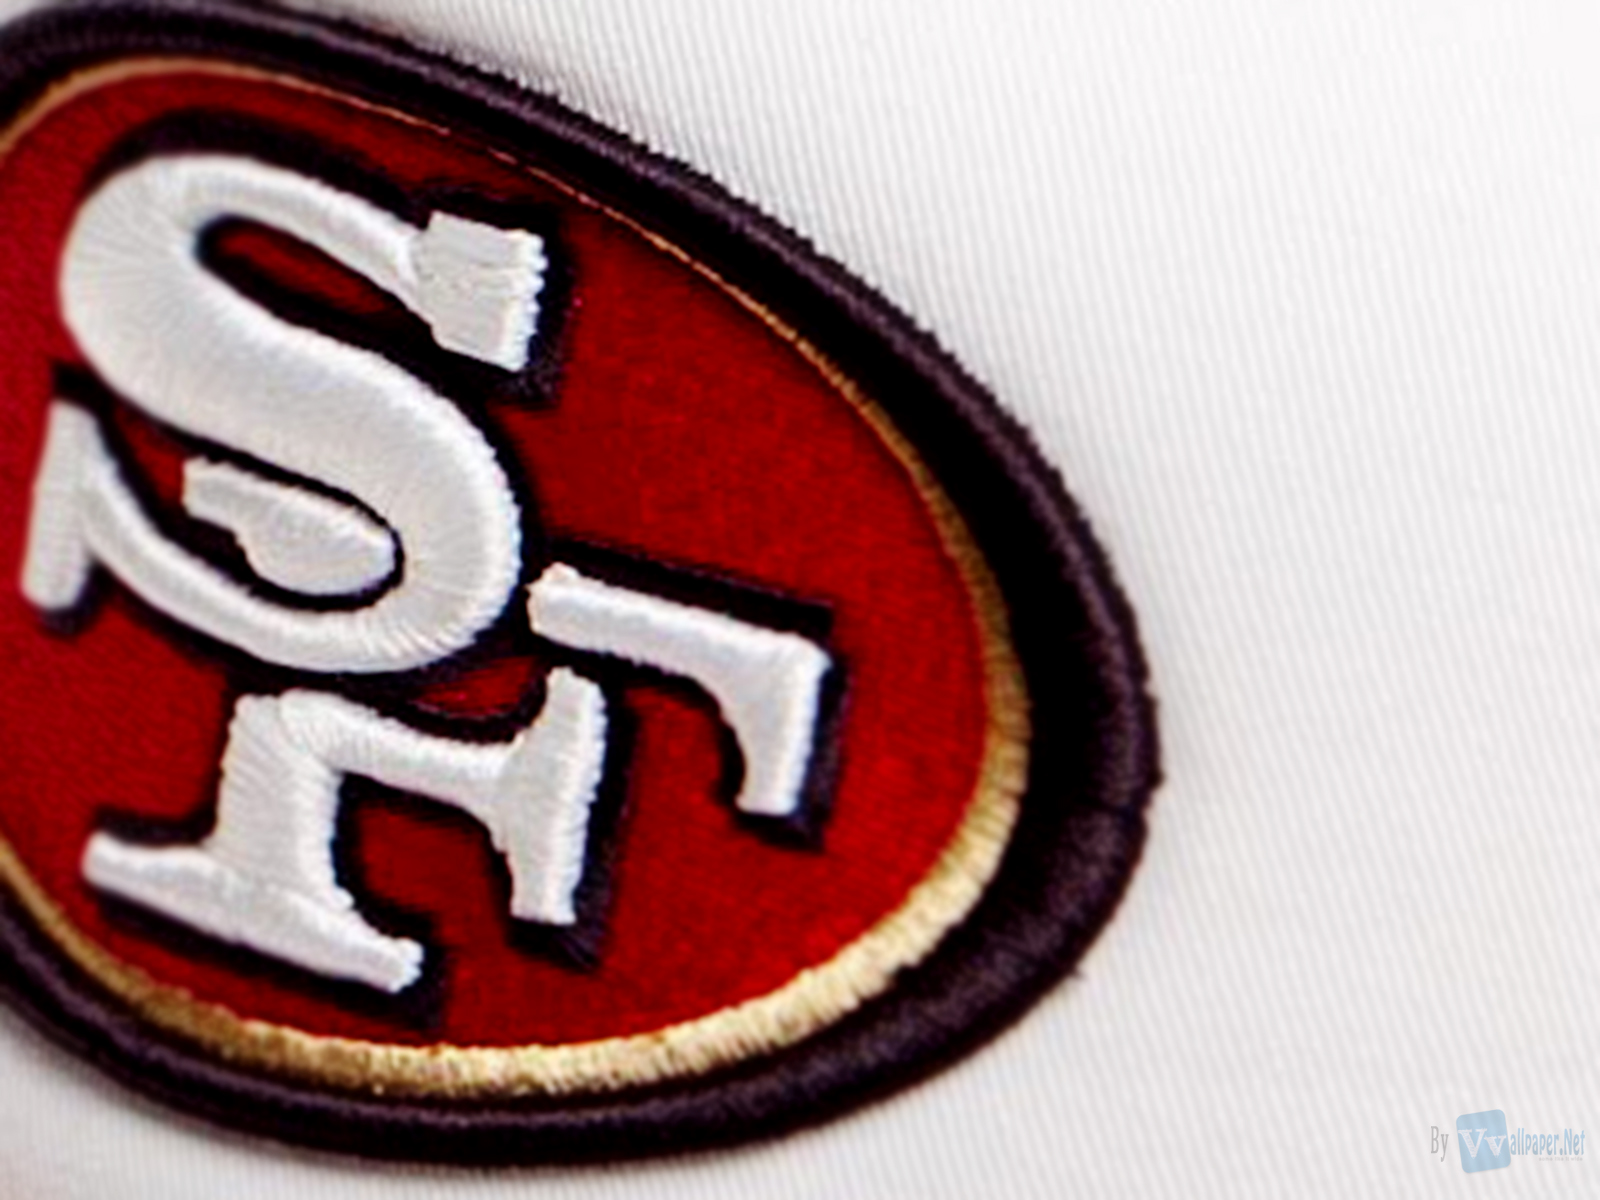 49ers wallpapers HD HD Wallpapers Backgrounds Photos Pictures